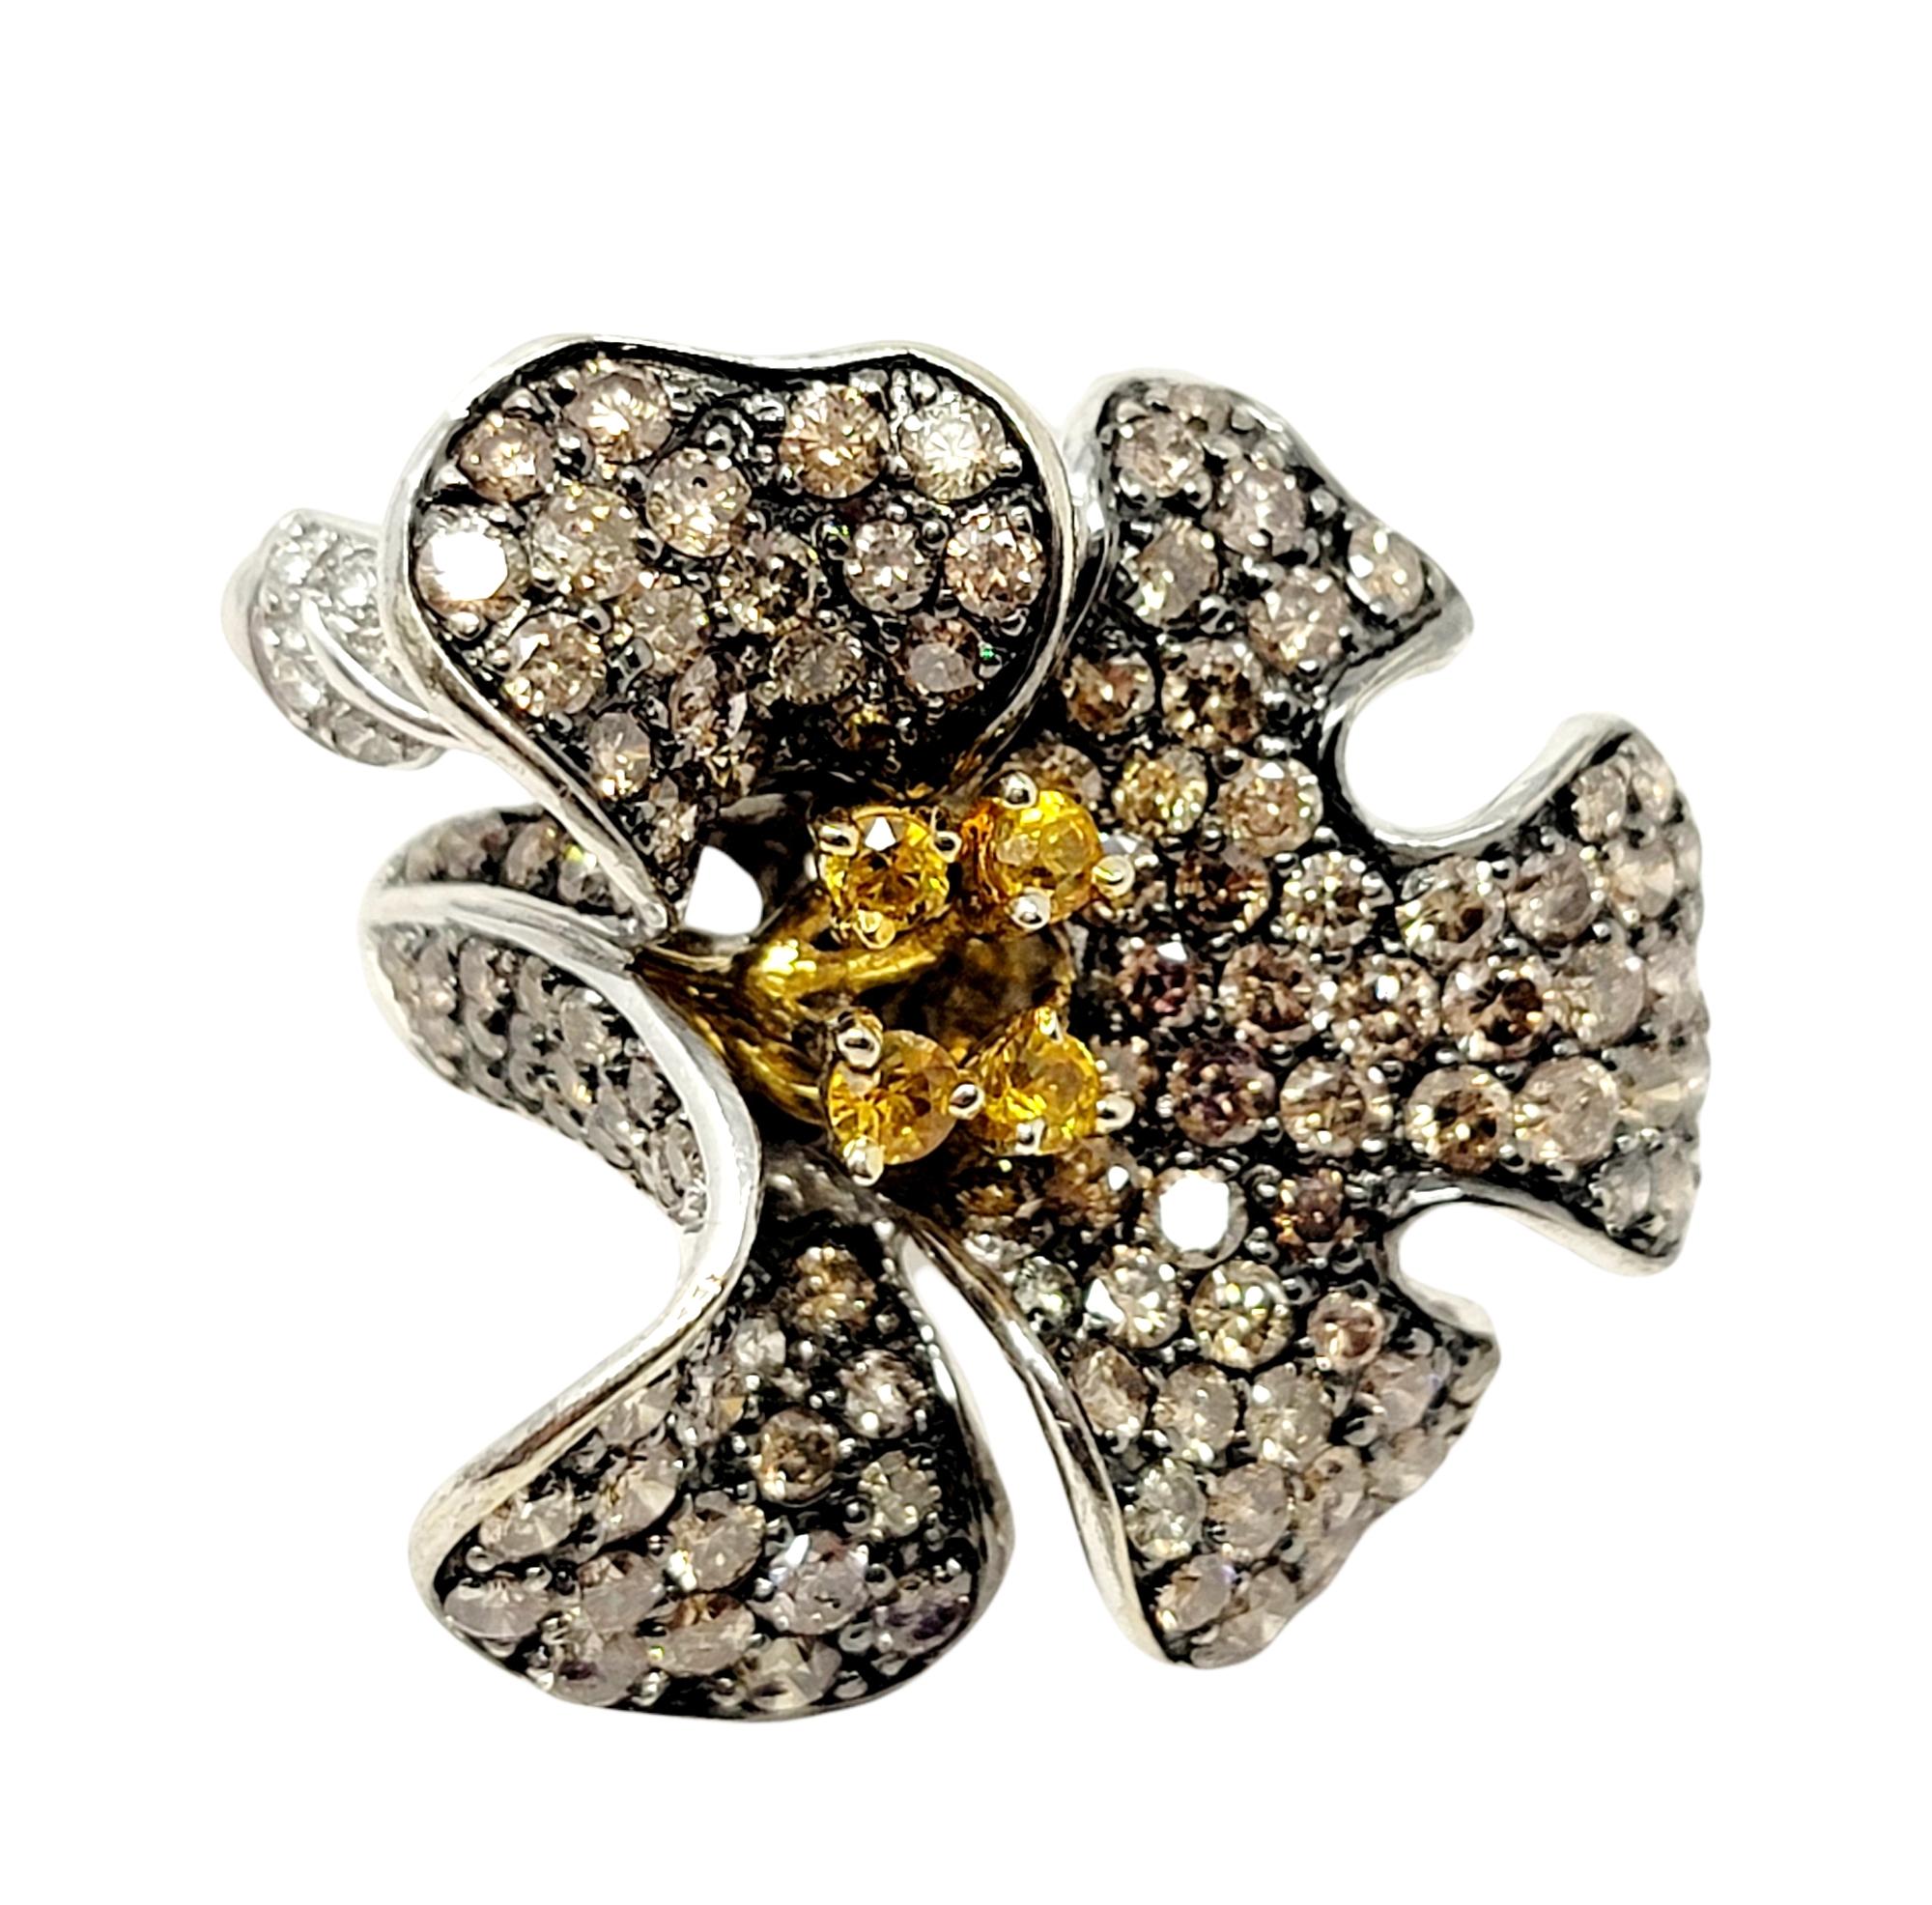 3D Pave Diamond Orchid Flower Ring with Orange Sapphire Accents in White Gold In Good Condition For Sale In Scottsdale, AZ